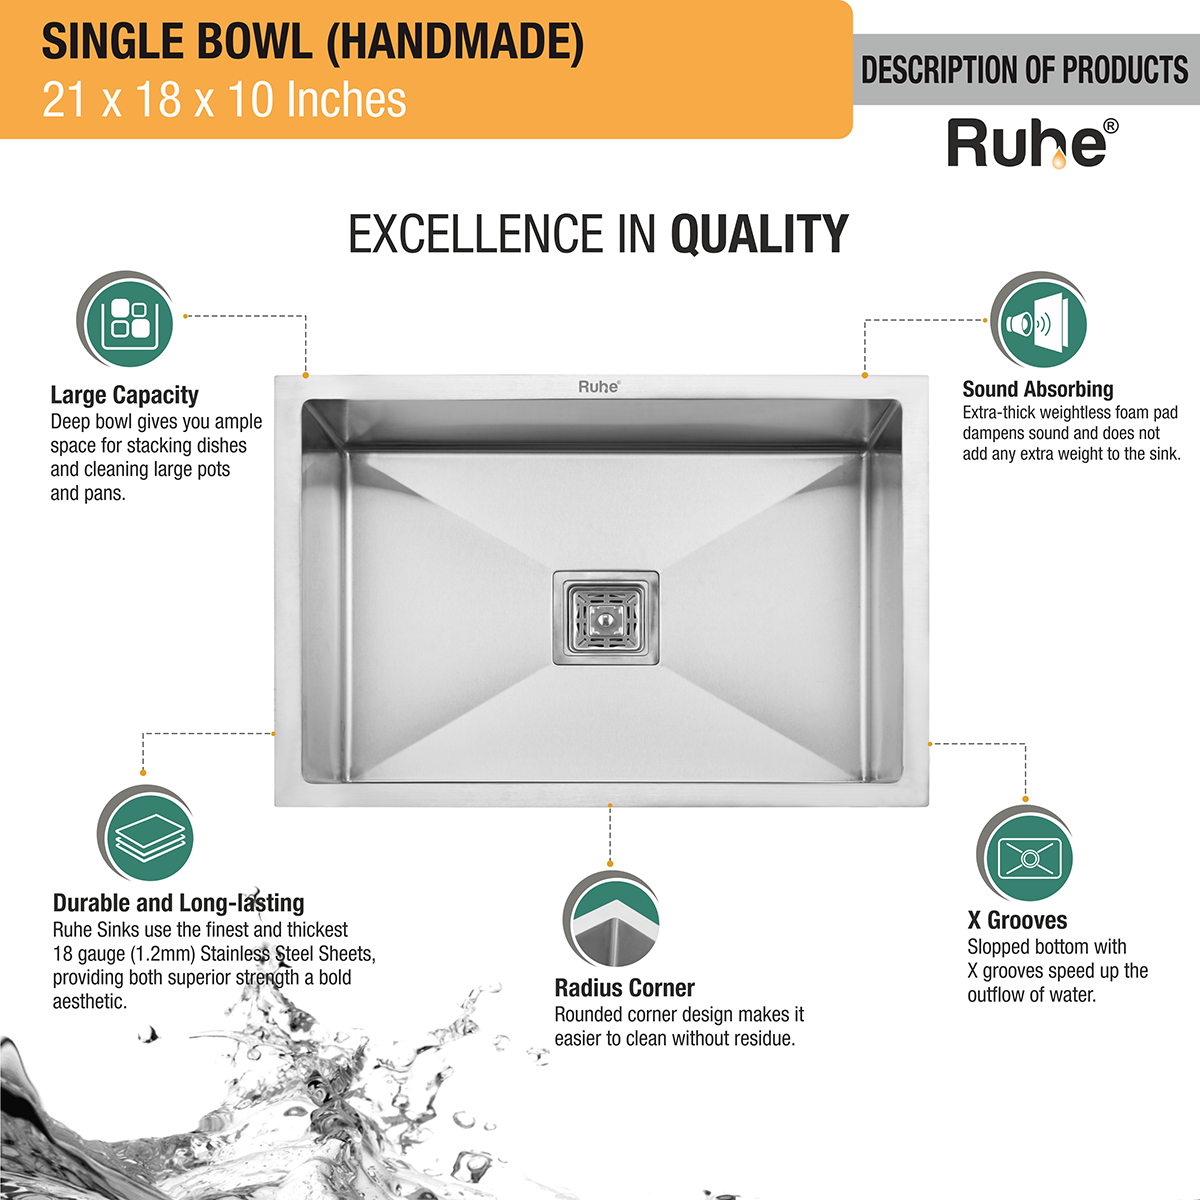 Handmade Single Bowl Premium Stainless Steel Kitchen Sink (21 x 18 x 10 Inches) description of products